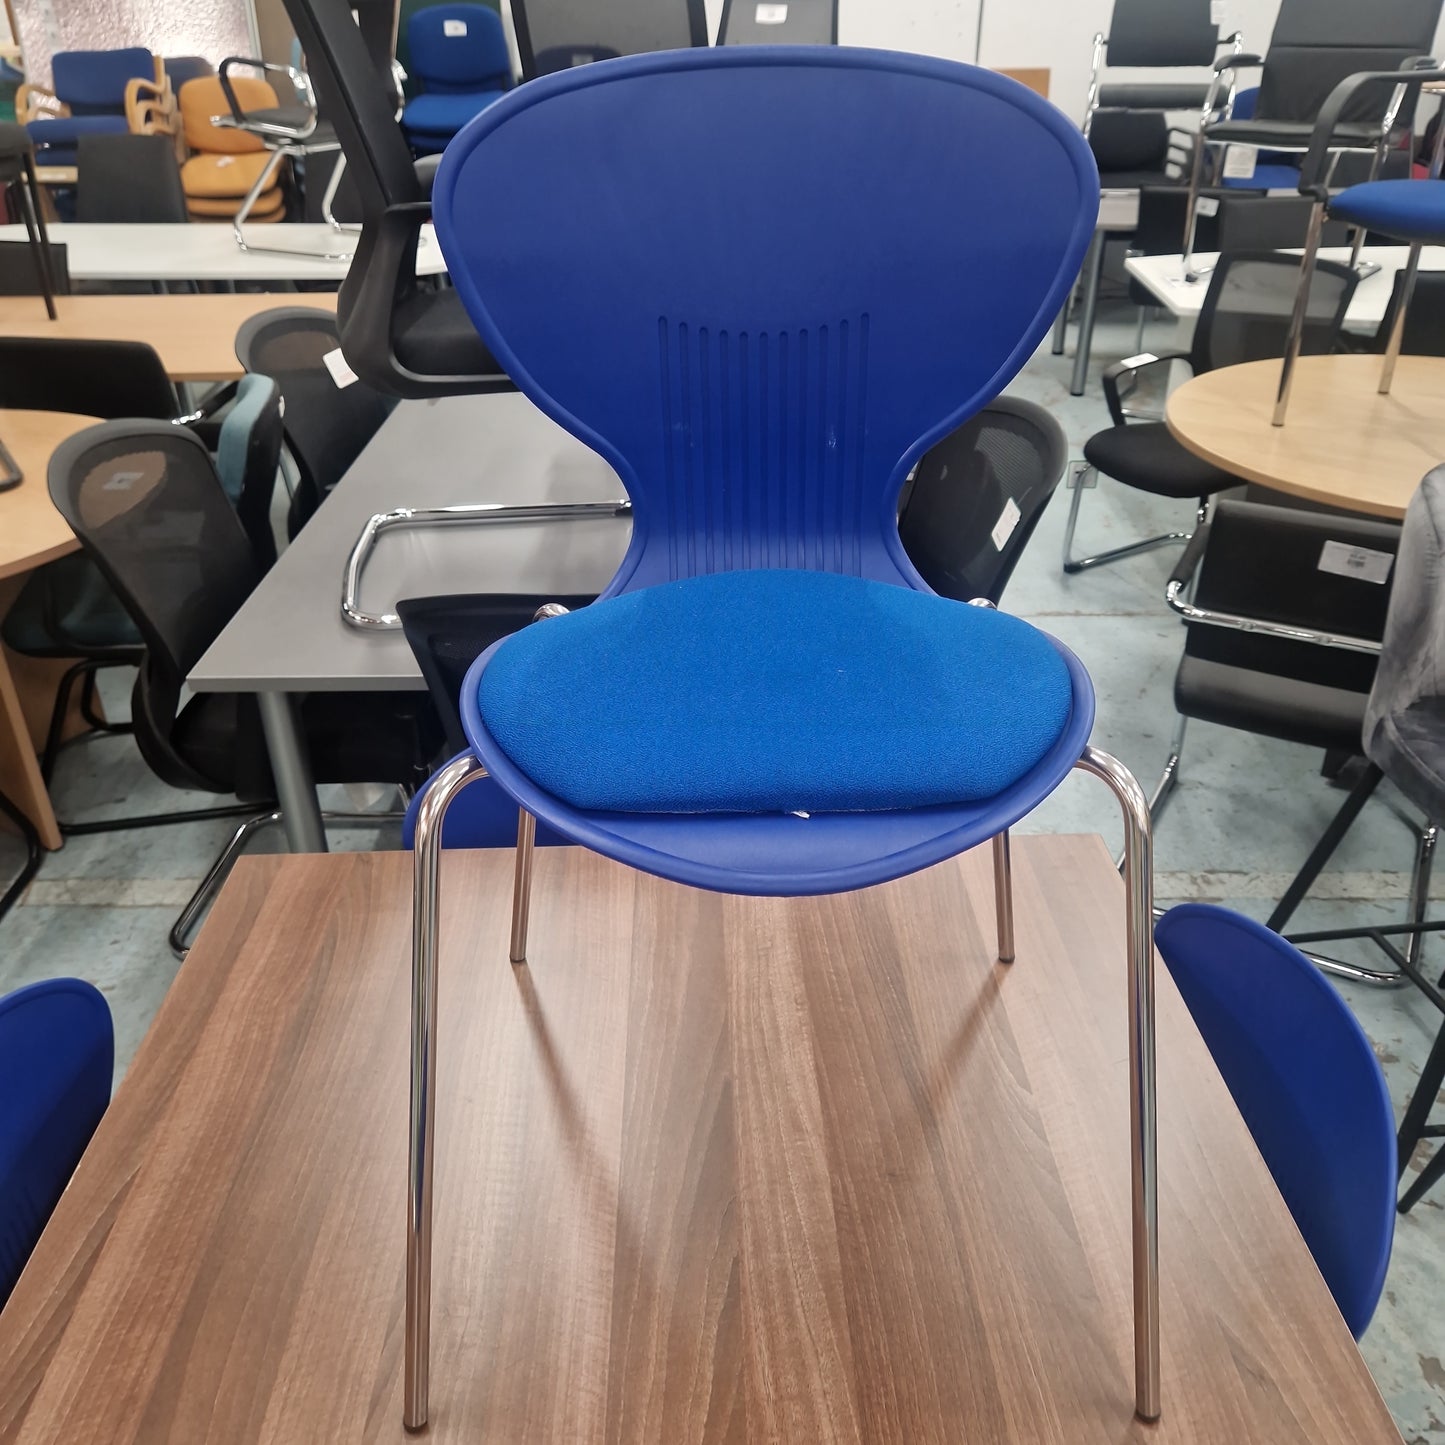 Plastic blue stacking chair blue fabric seat, chrome frame